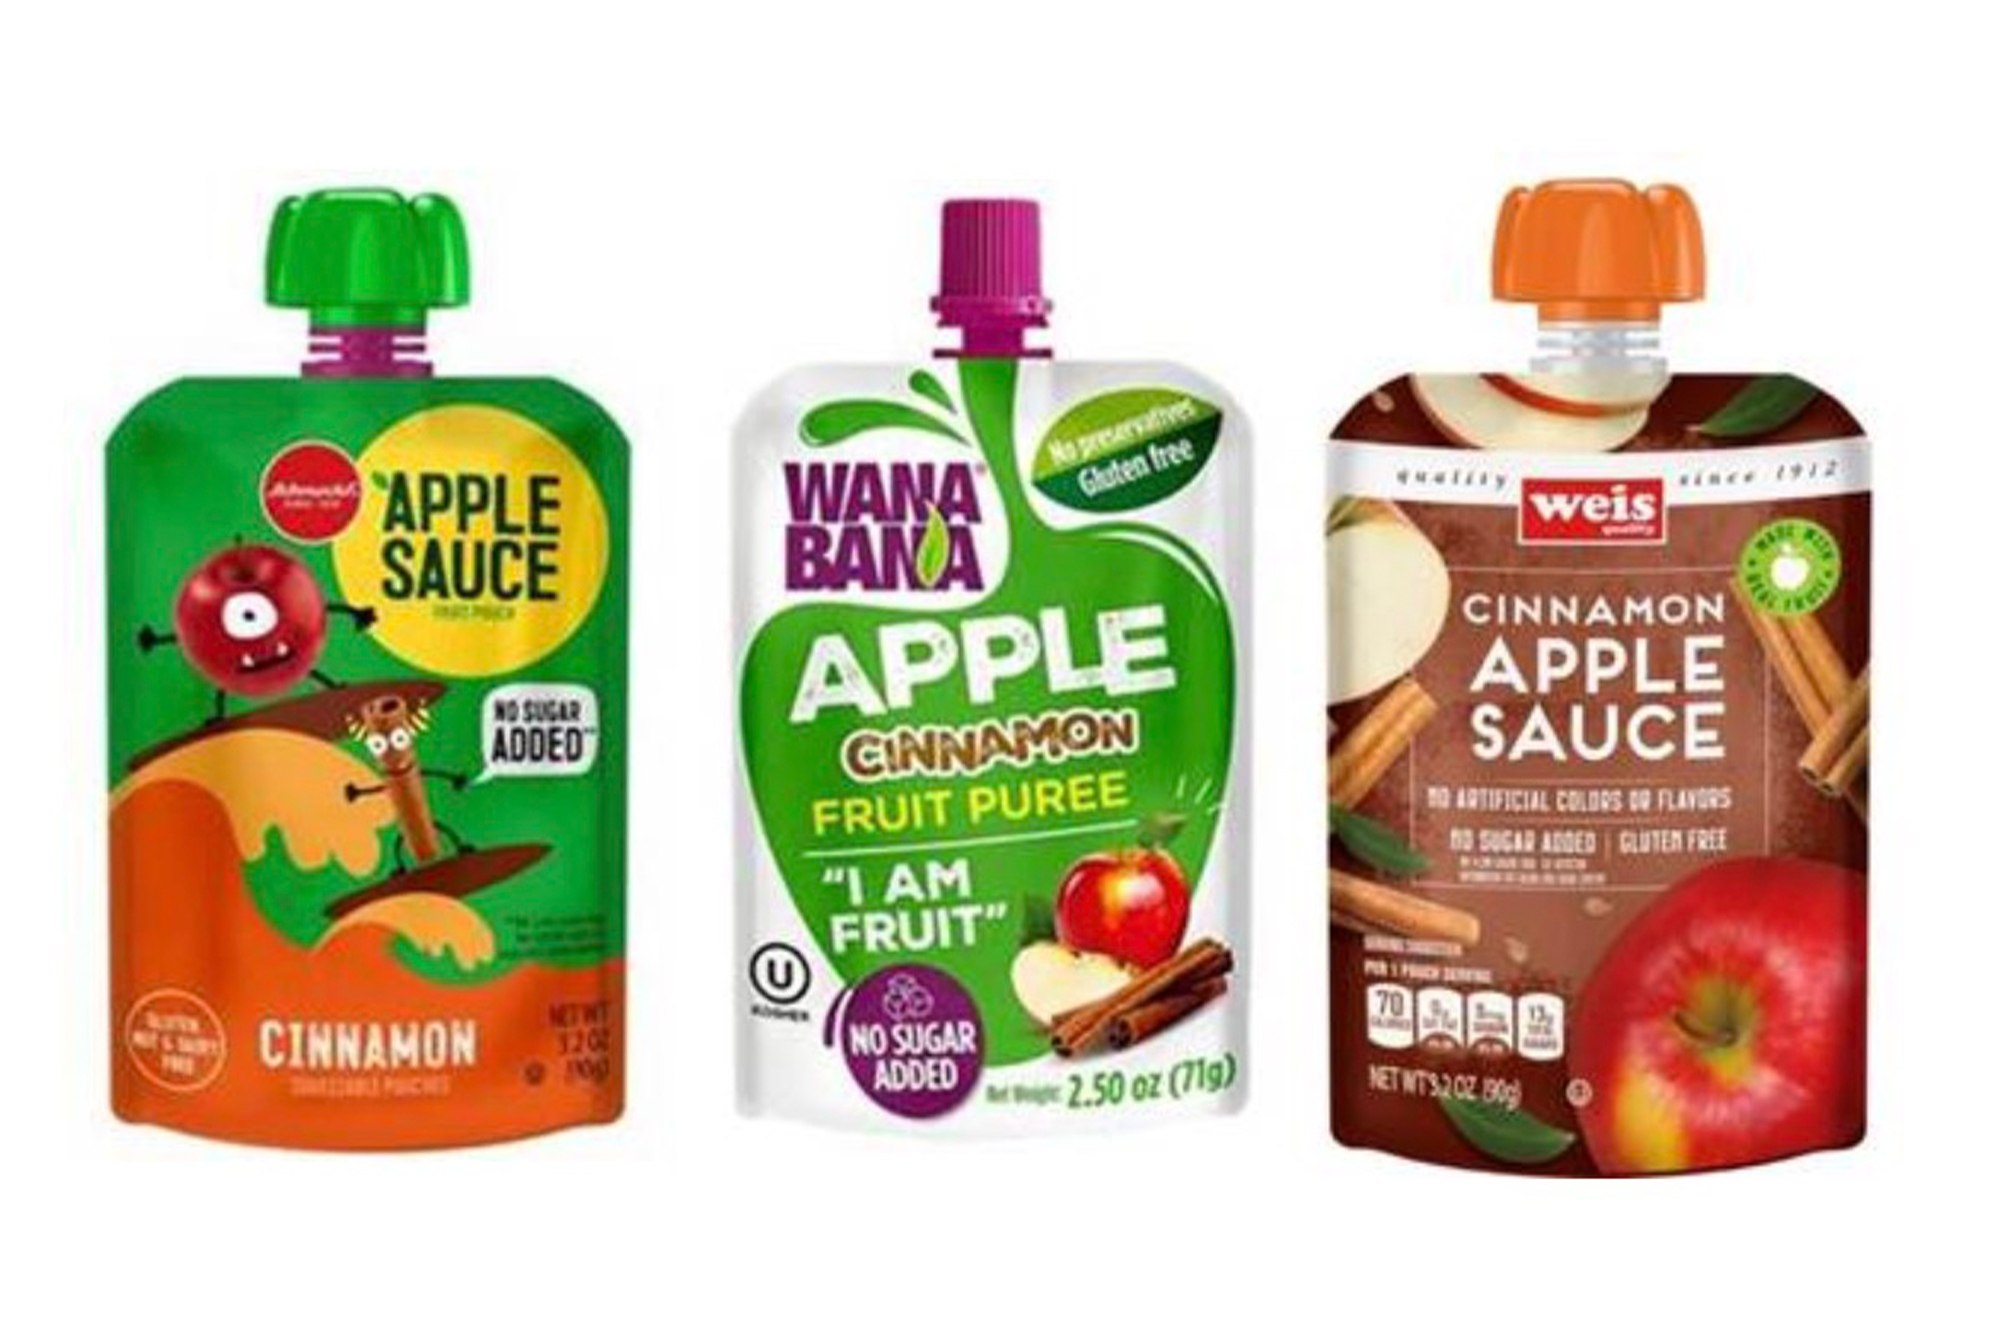 The tainted products in question: WanaBana, Schnucks, and Weis brand cinnamon applesauce pouches.